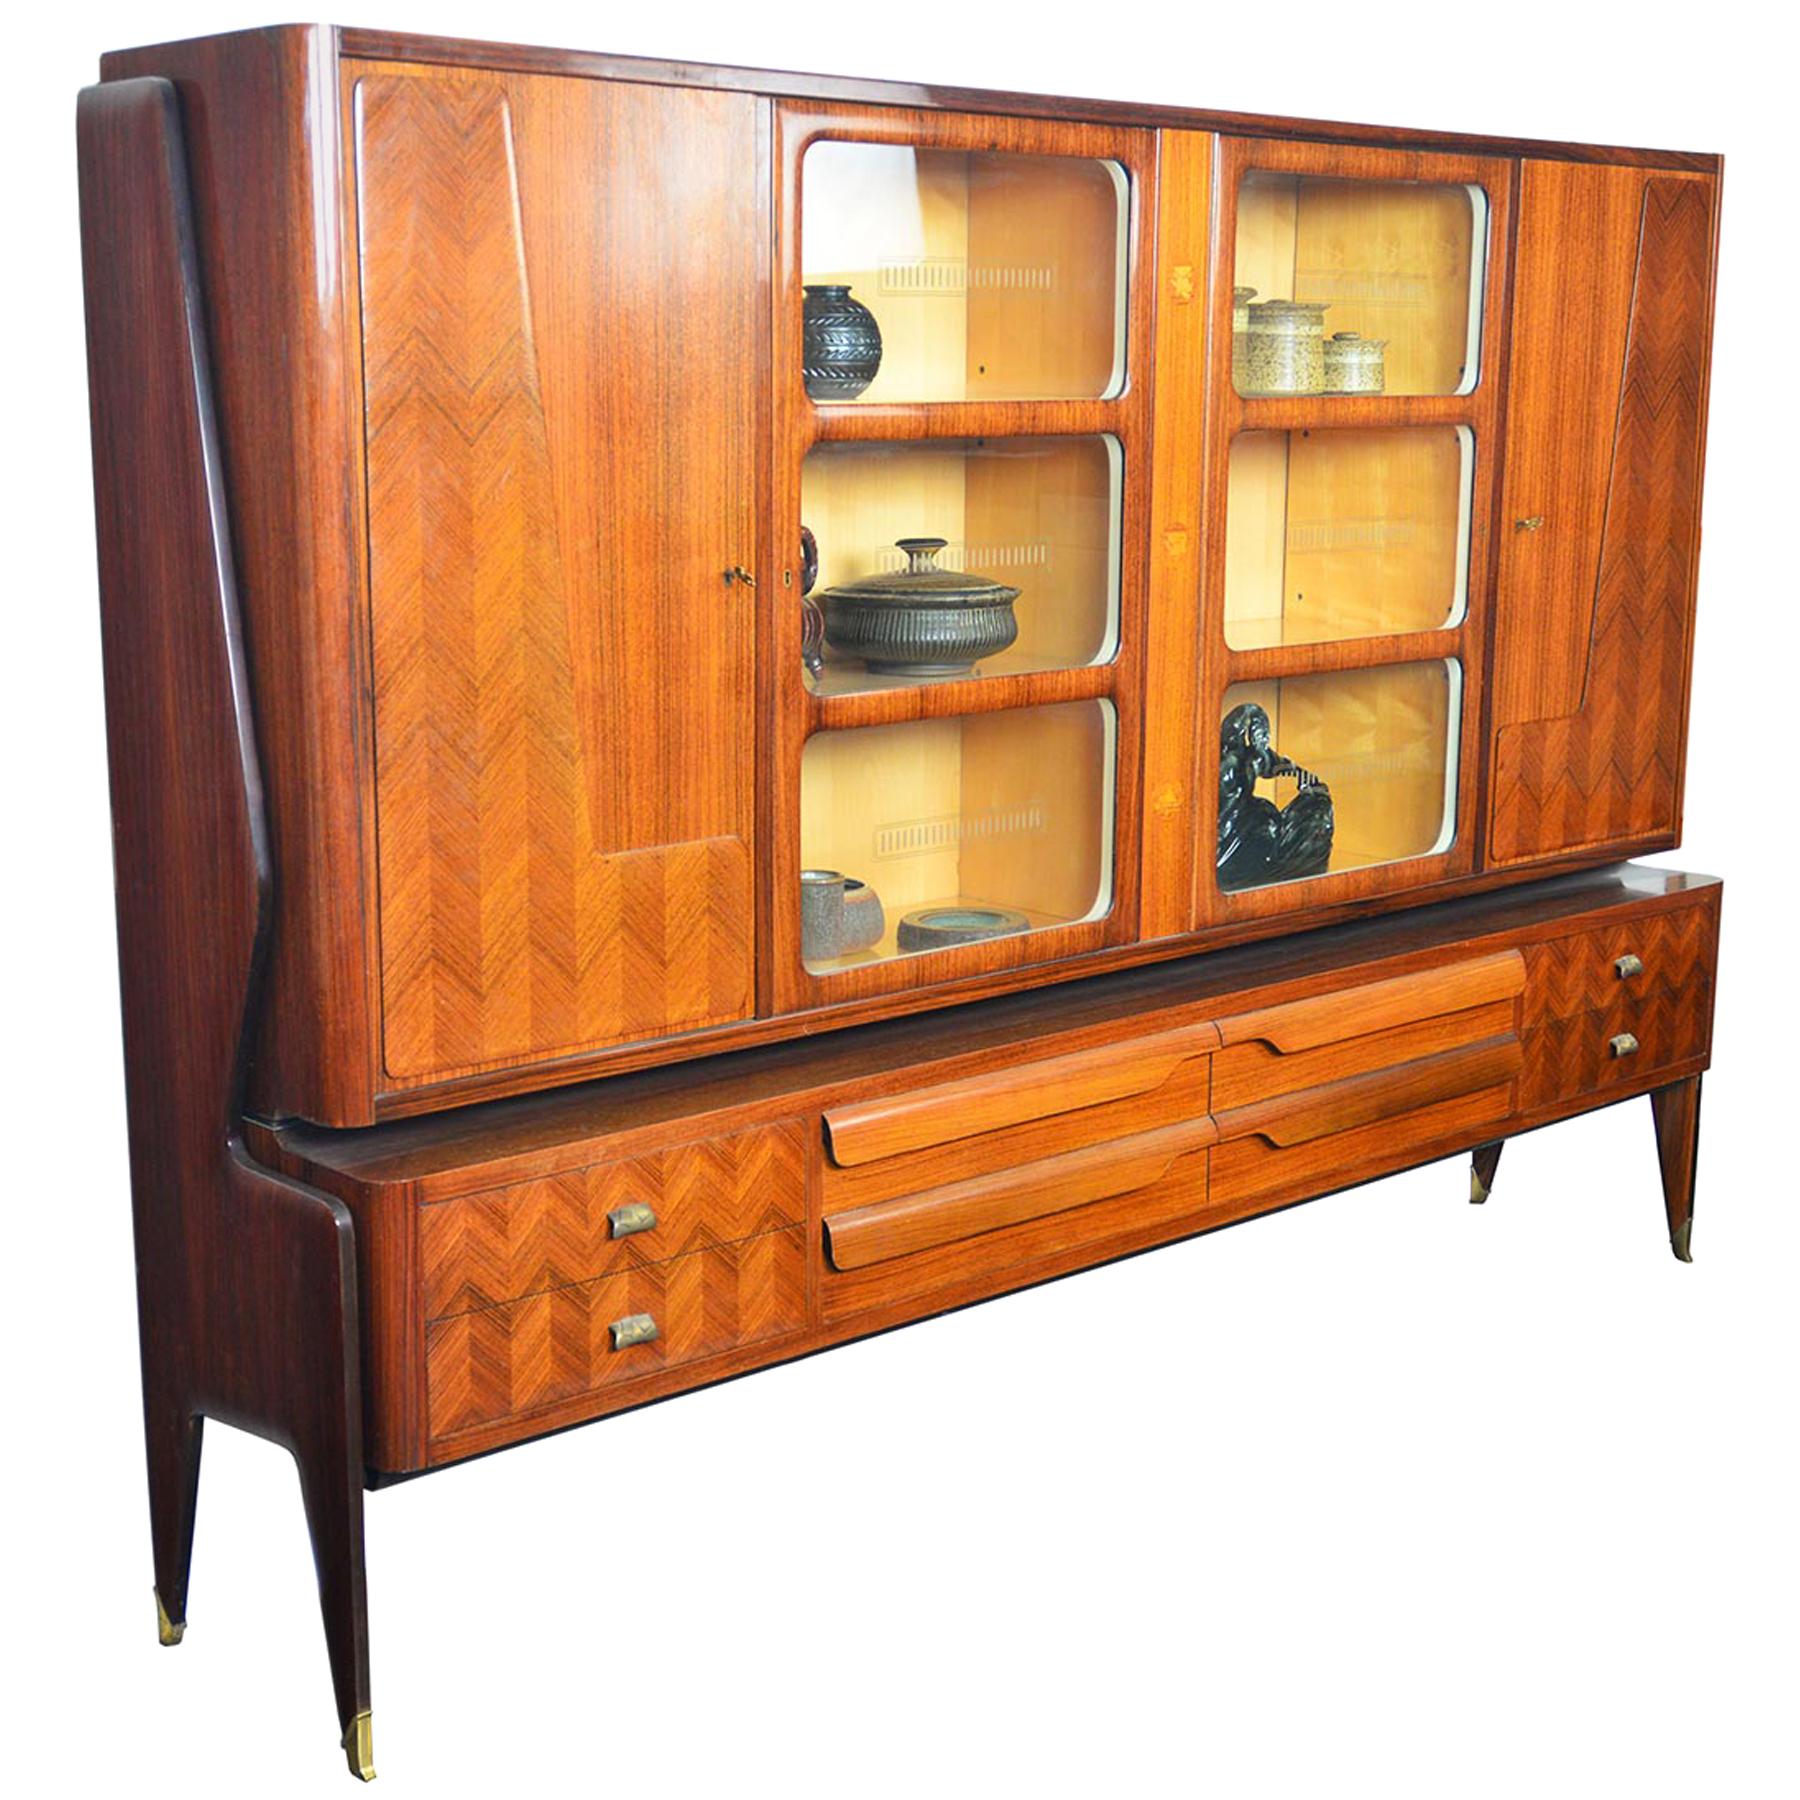 This grand Italian modern bookcase by Vittorio Dassi offers stunning craftsmanship and delightful design details throughout. The large upper hutch offers four locking doors. The interior cabinets feature glass doors with original etched detailing.